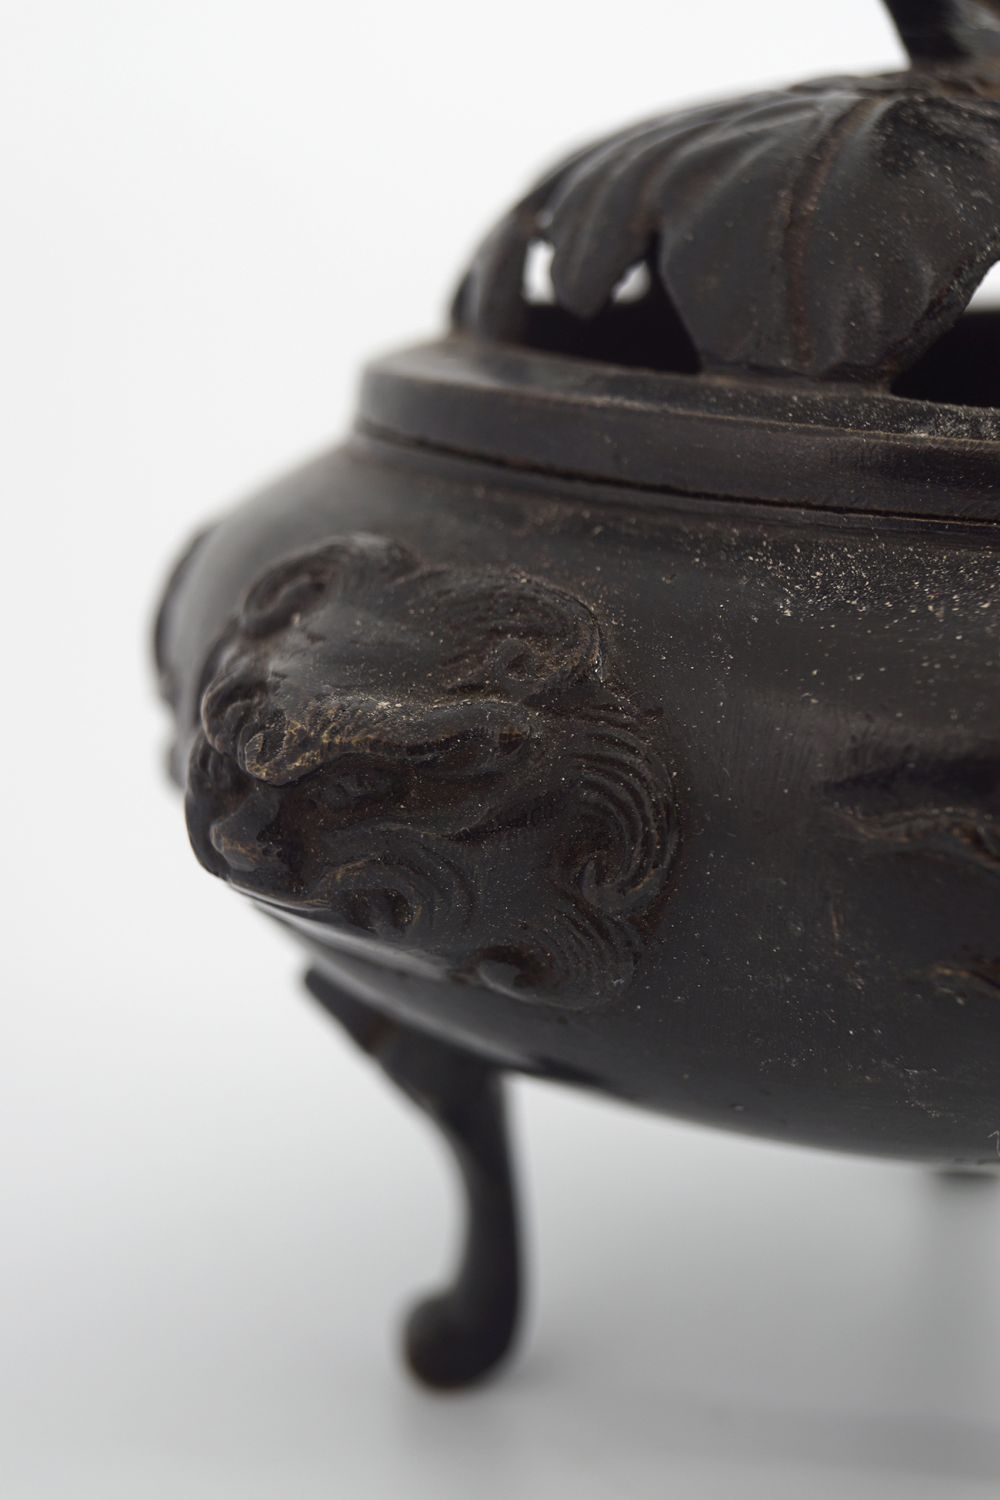 CHINESE QING BRONZE CENSOR - Image 3 of 3